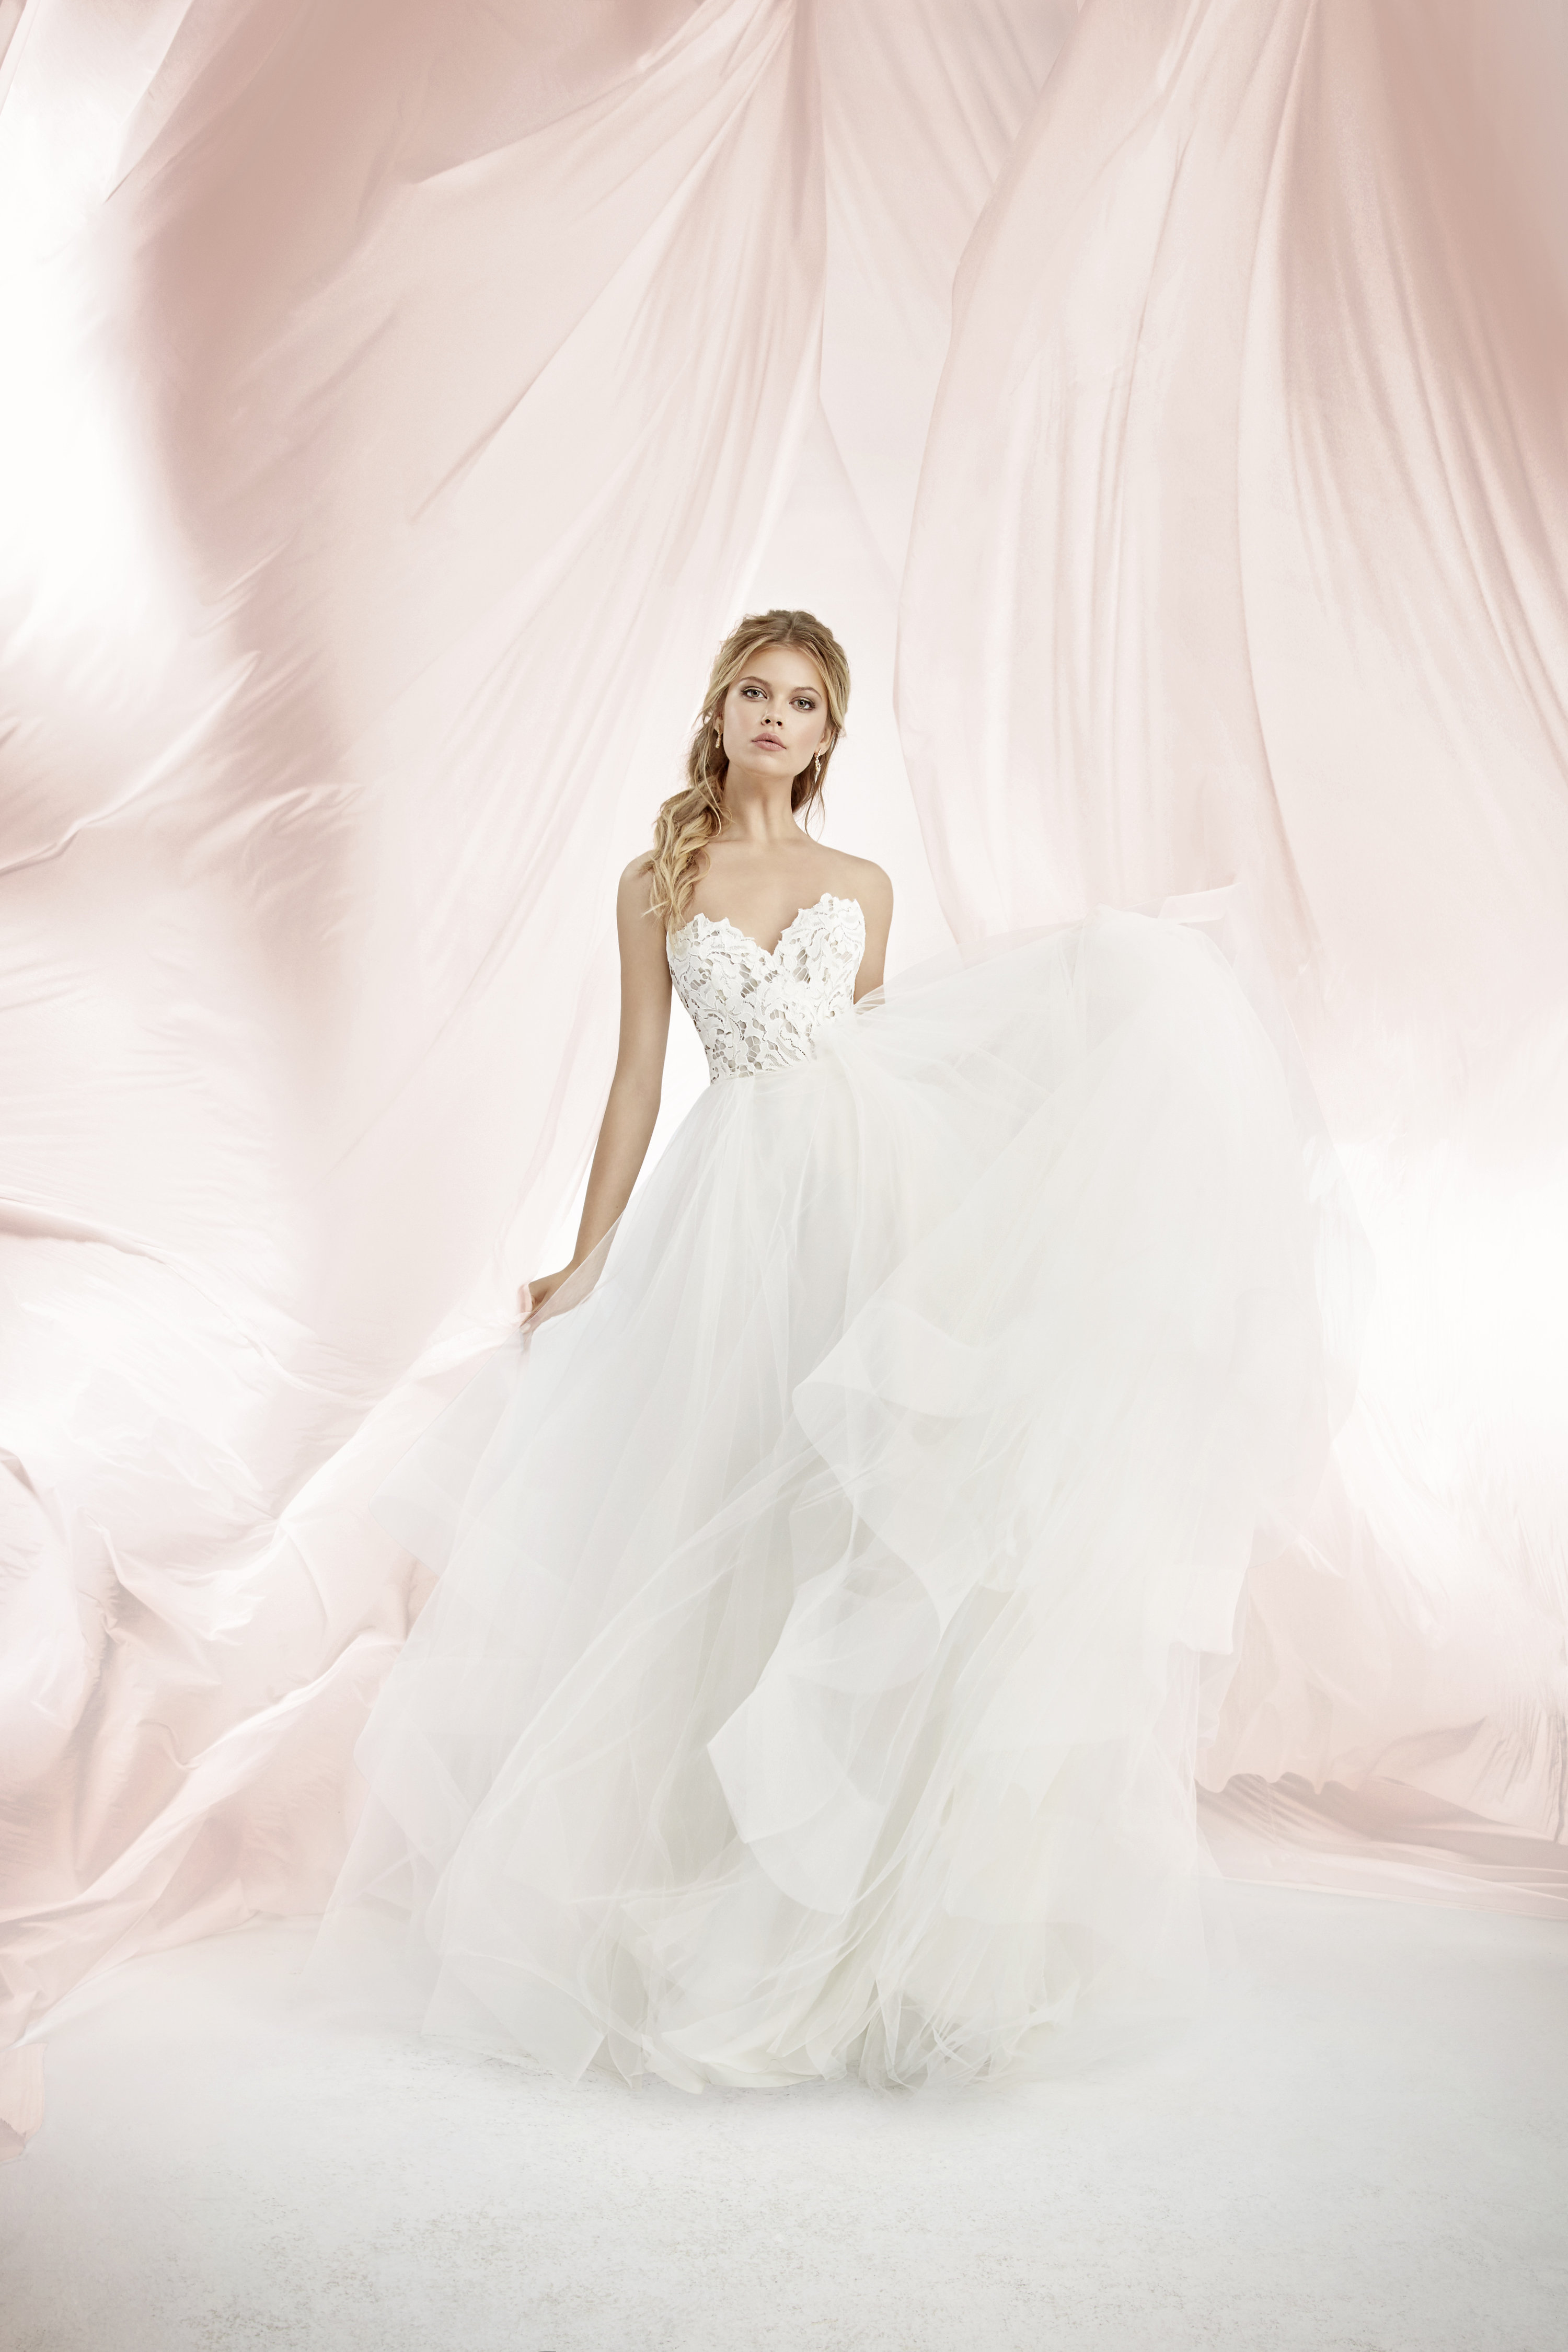 Bridal Gowns And Wedding Dresses By Jlm Couture Style 1760 Dayton